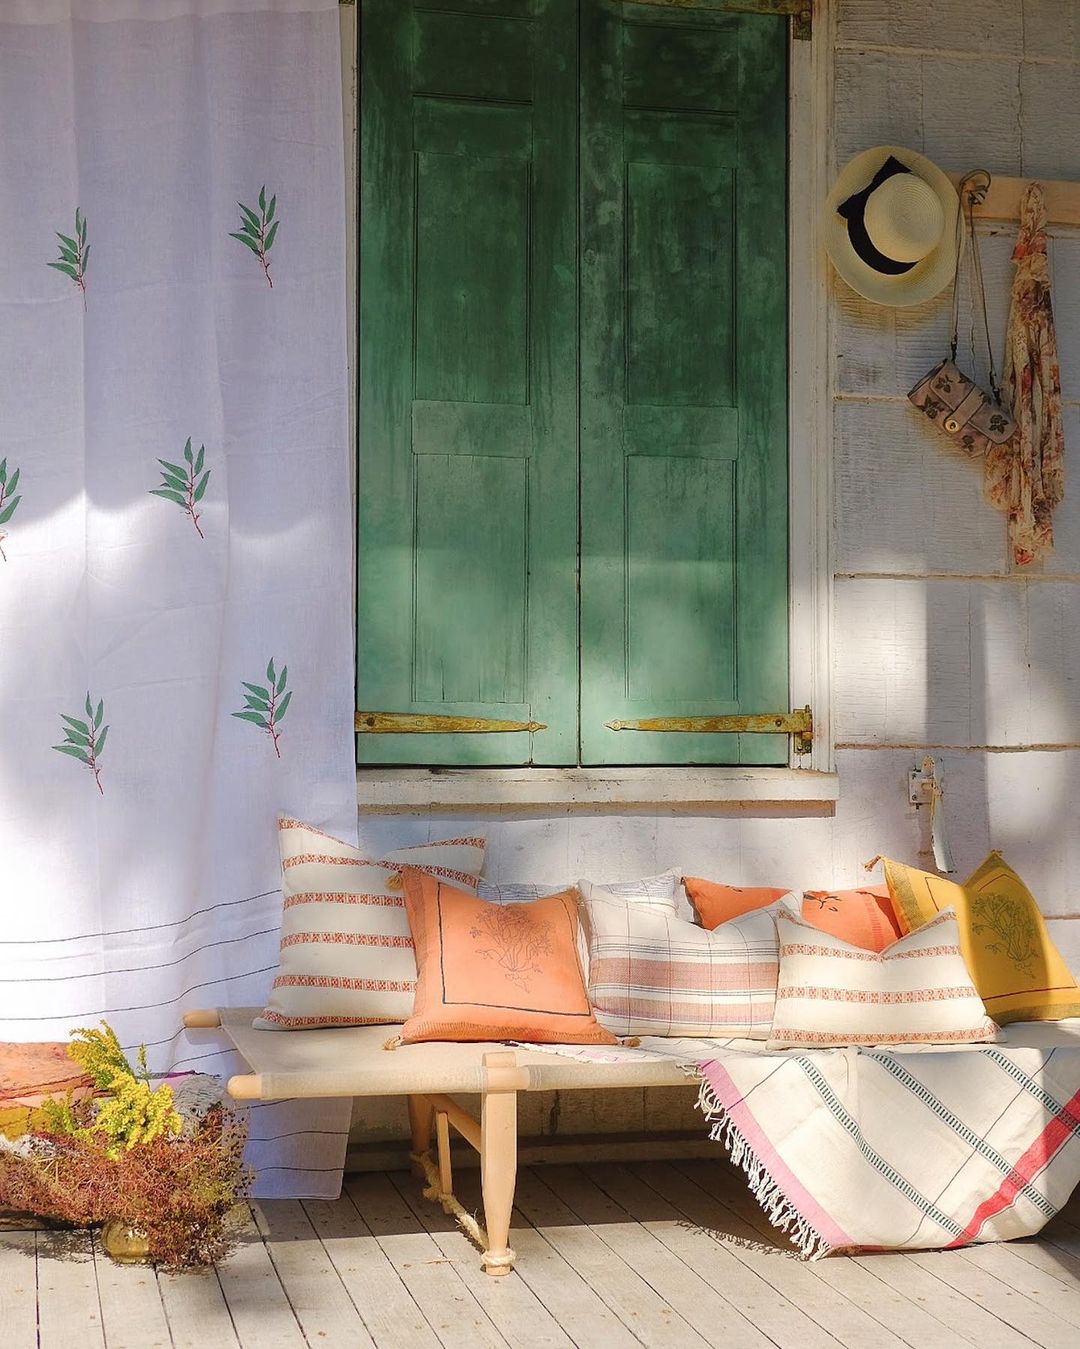 11 Home Decor Brands More Sustainable Than HomeGoods - The Good Trade